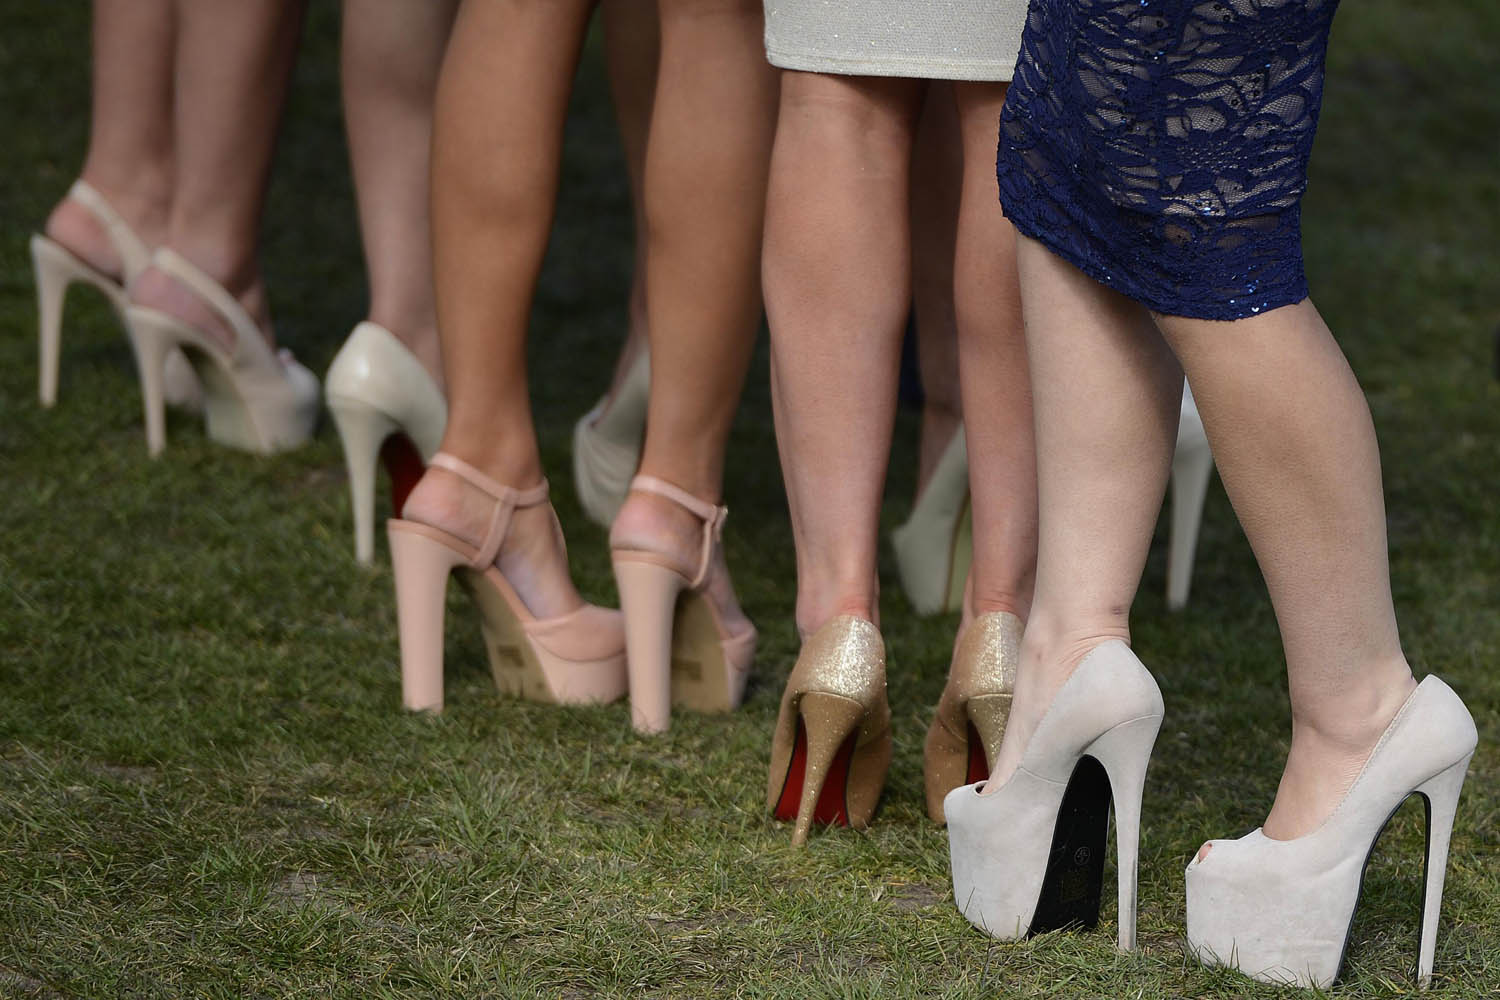 Racegoers shoes are seen as they arrive for the second day of the Grand National meeting at Aintree